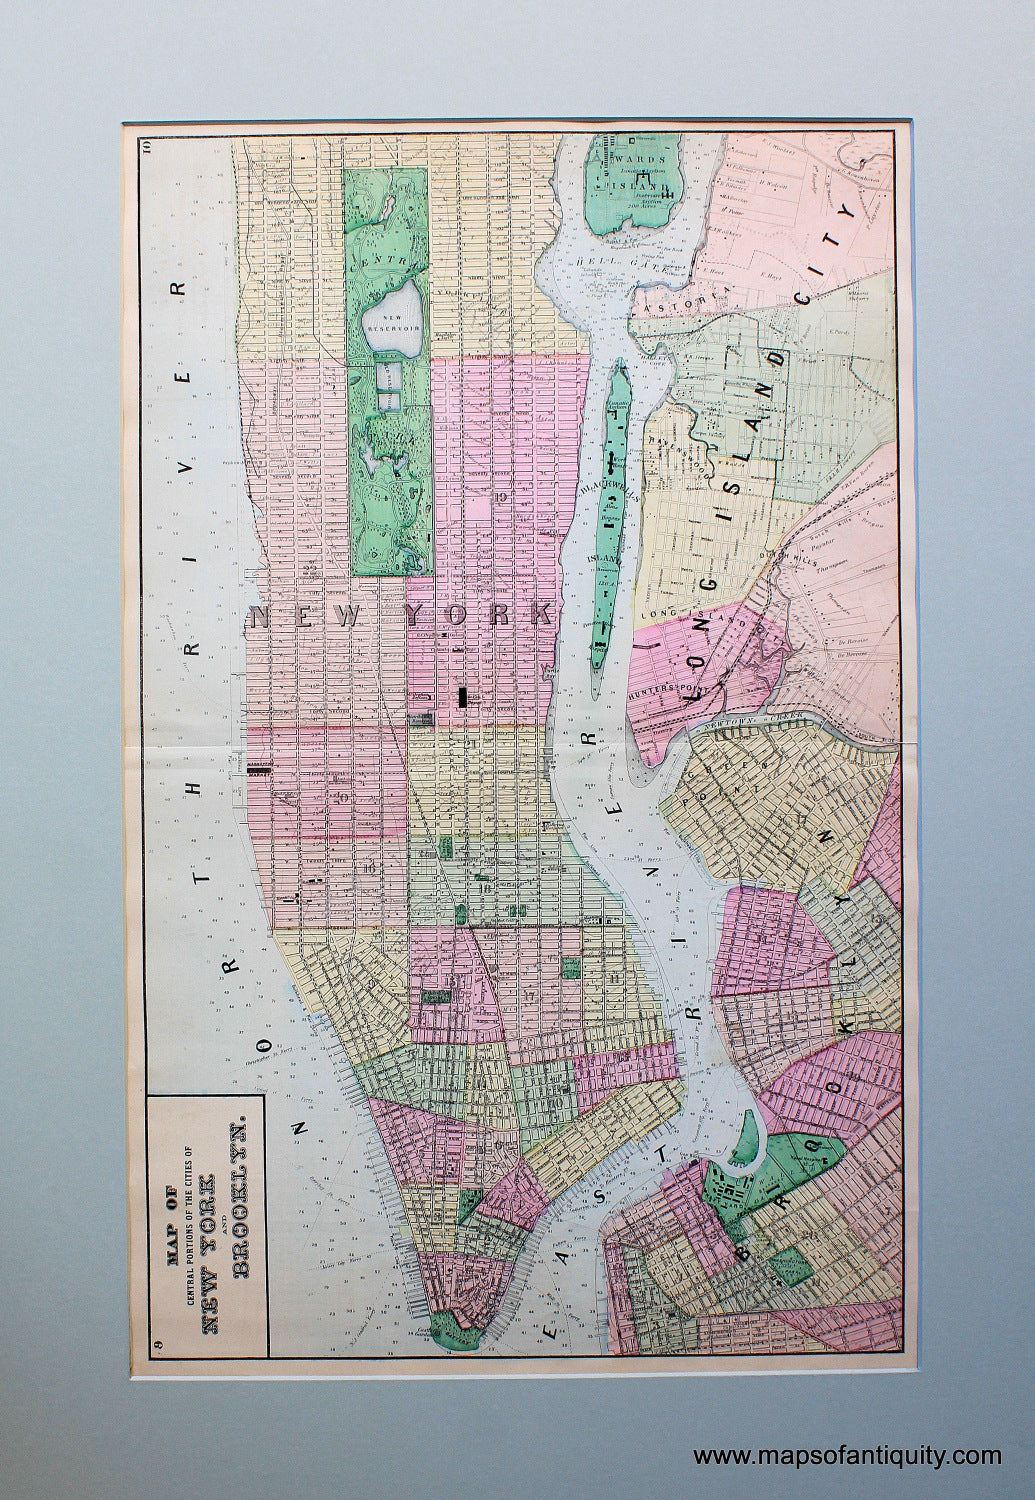 Antique-Hand-Colored-Map-Map-of-the-Central-Portions-of-the-Cities-of-New-York-and-Brooklyn.**********-United-States-Northeast-1873-Beers-Maps-Of-Antiquity